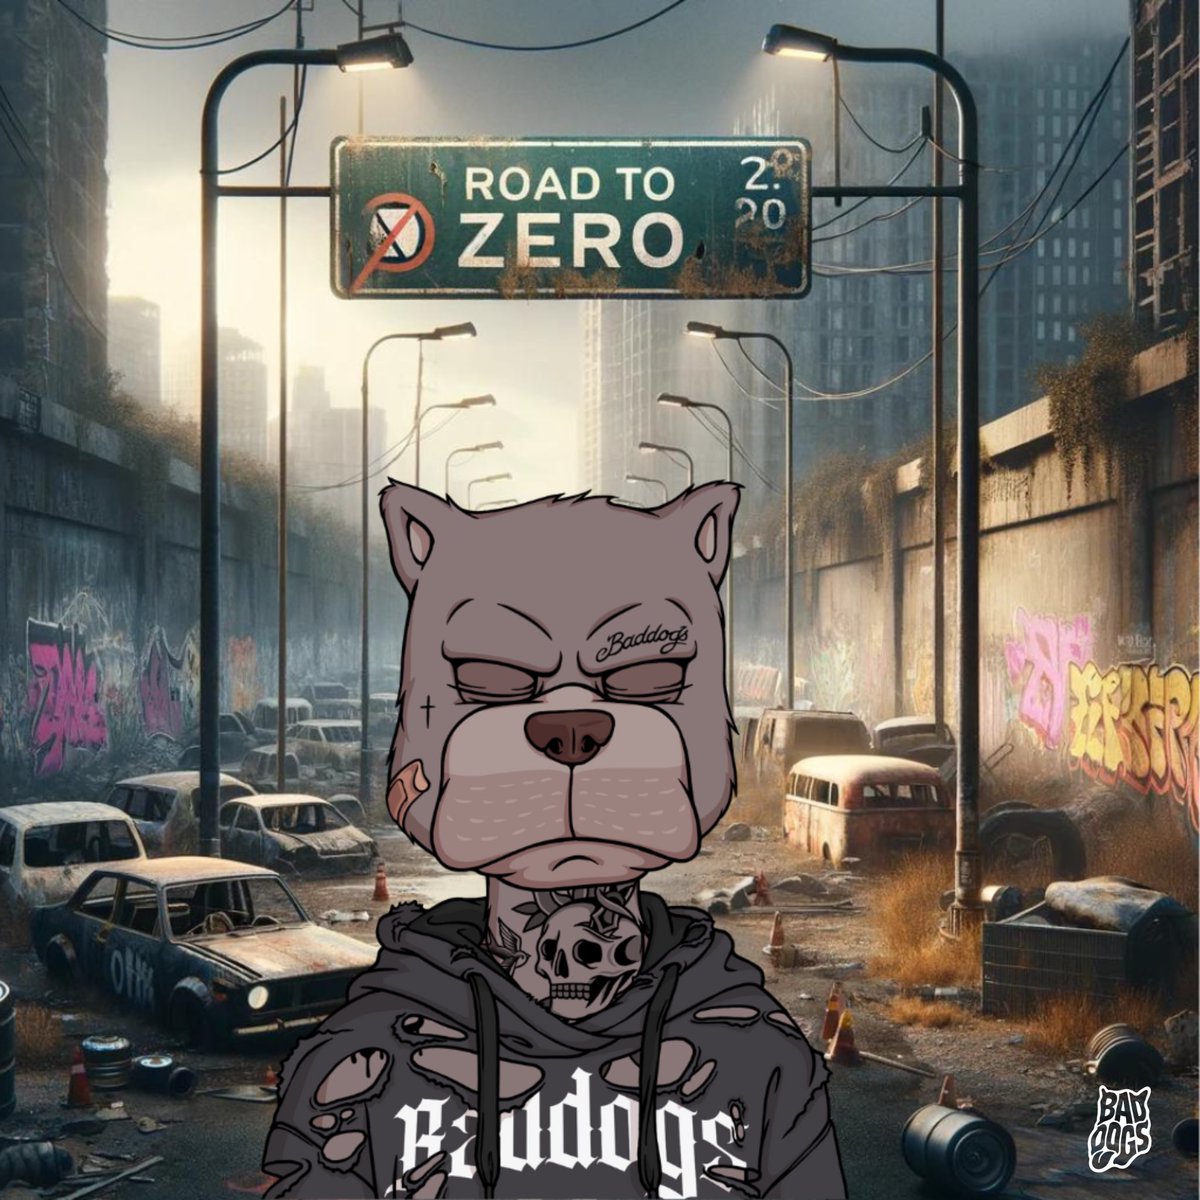 Hear us out! wOOF isn’t even original, and our artist 13six? Total myth. Pack your bags, we’re going to zero!  #BadDogsToZero #WAGZ